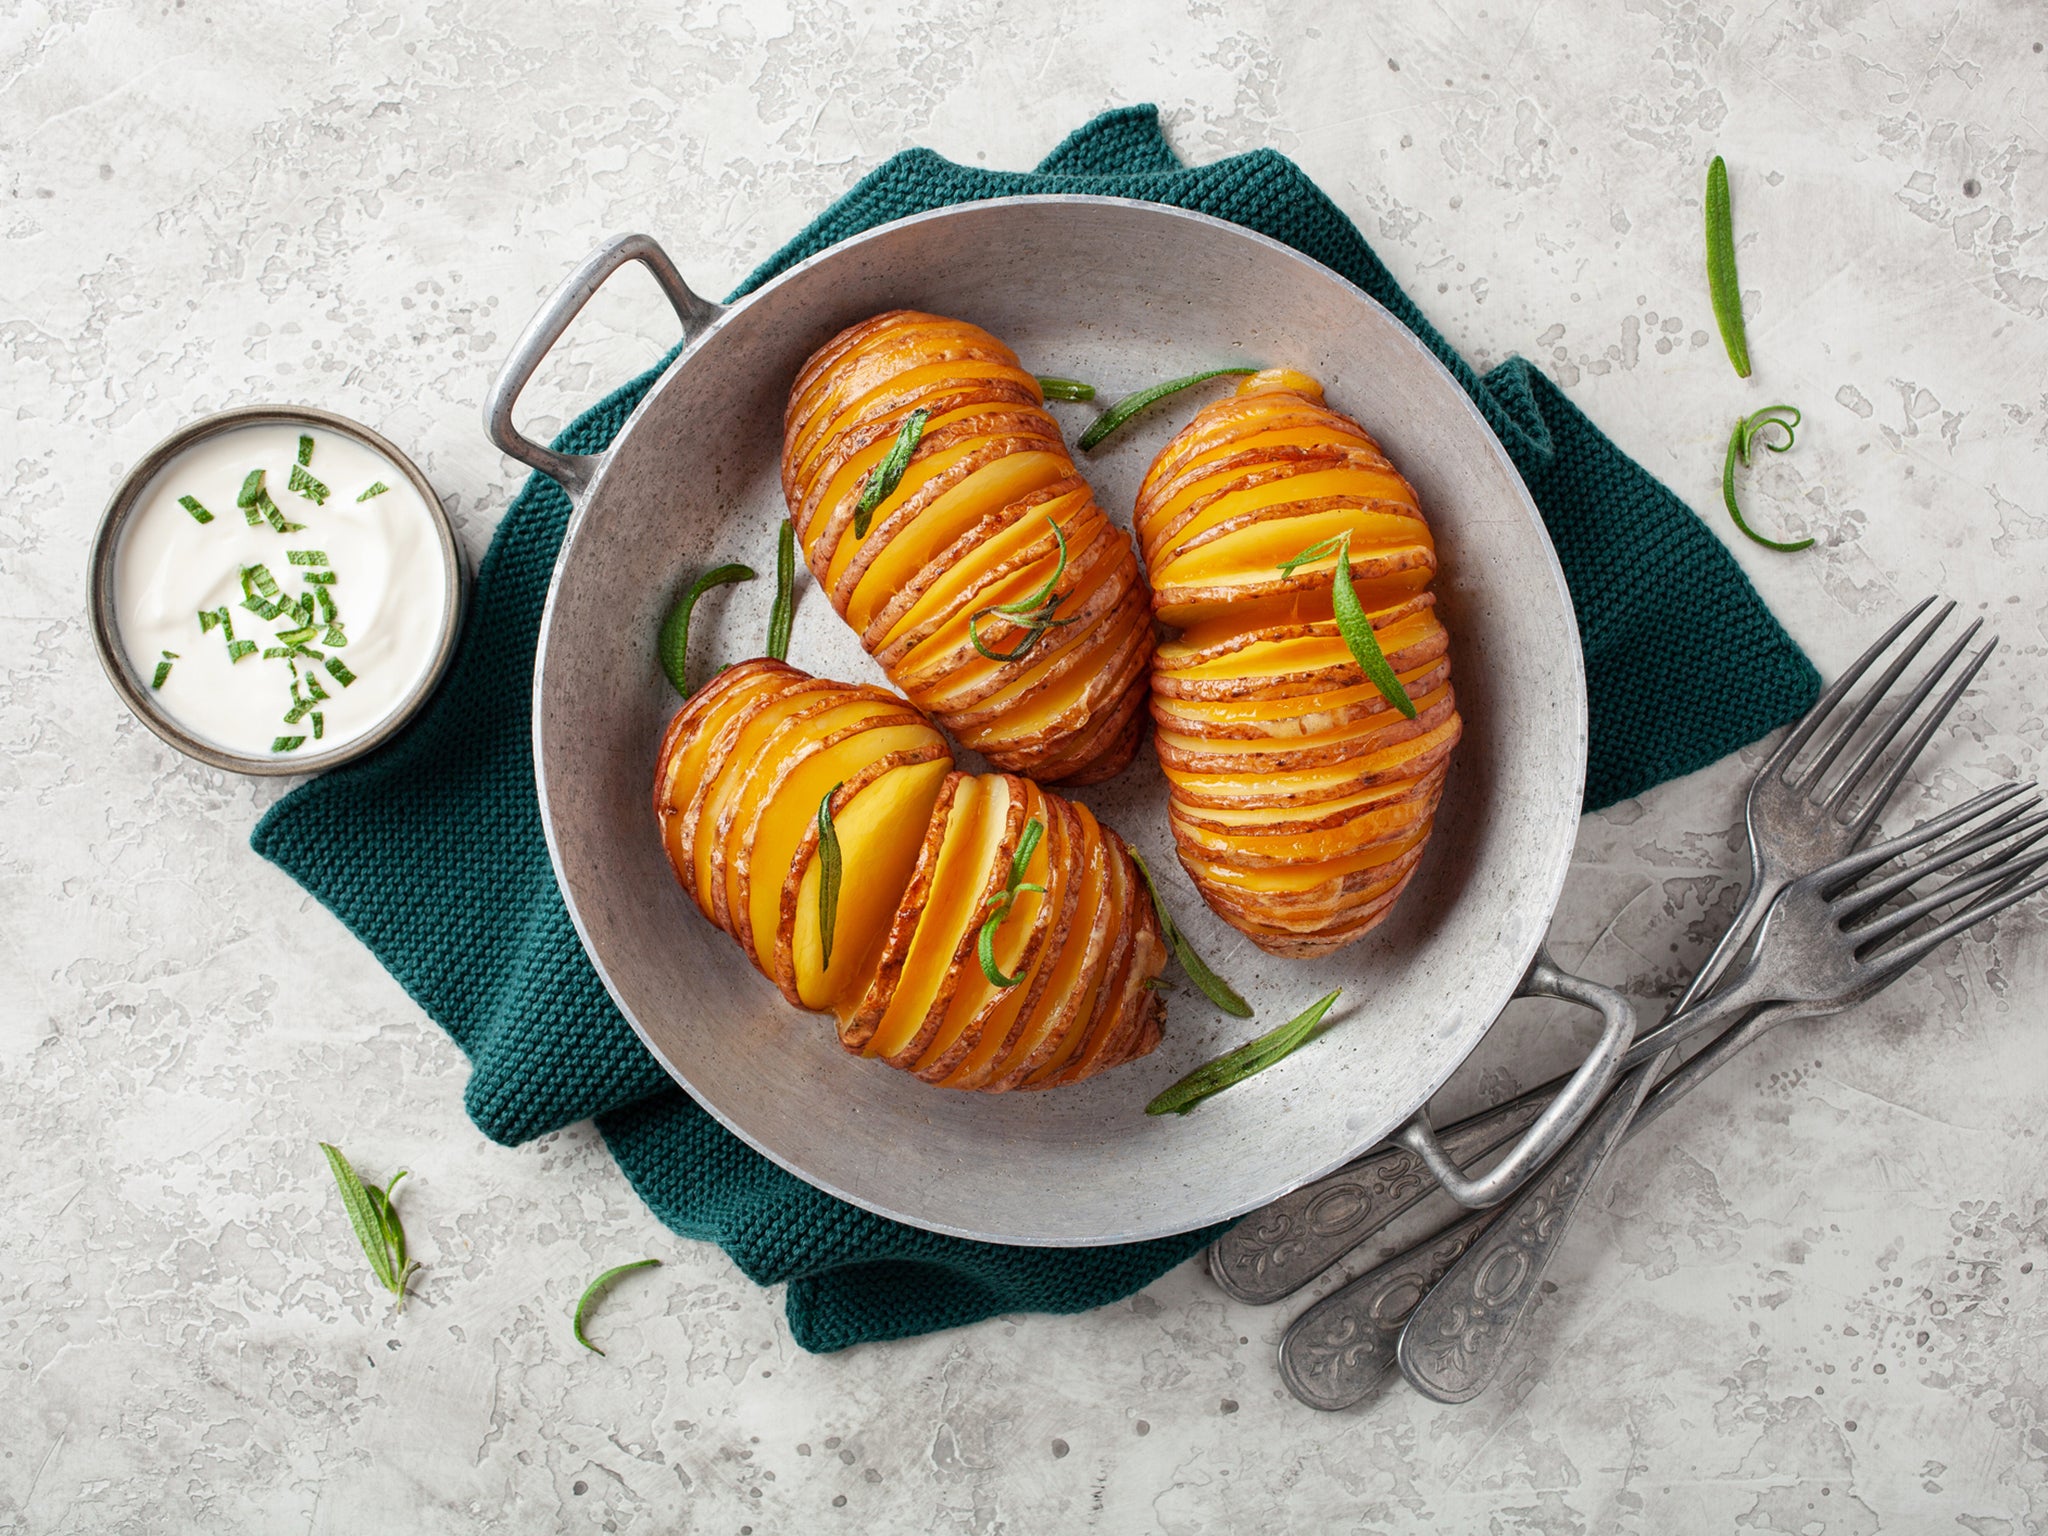 Perfectly crispy hasselback potatoes made in the air fryer, seasoned to perfection